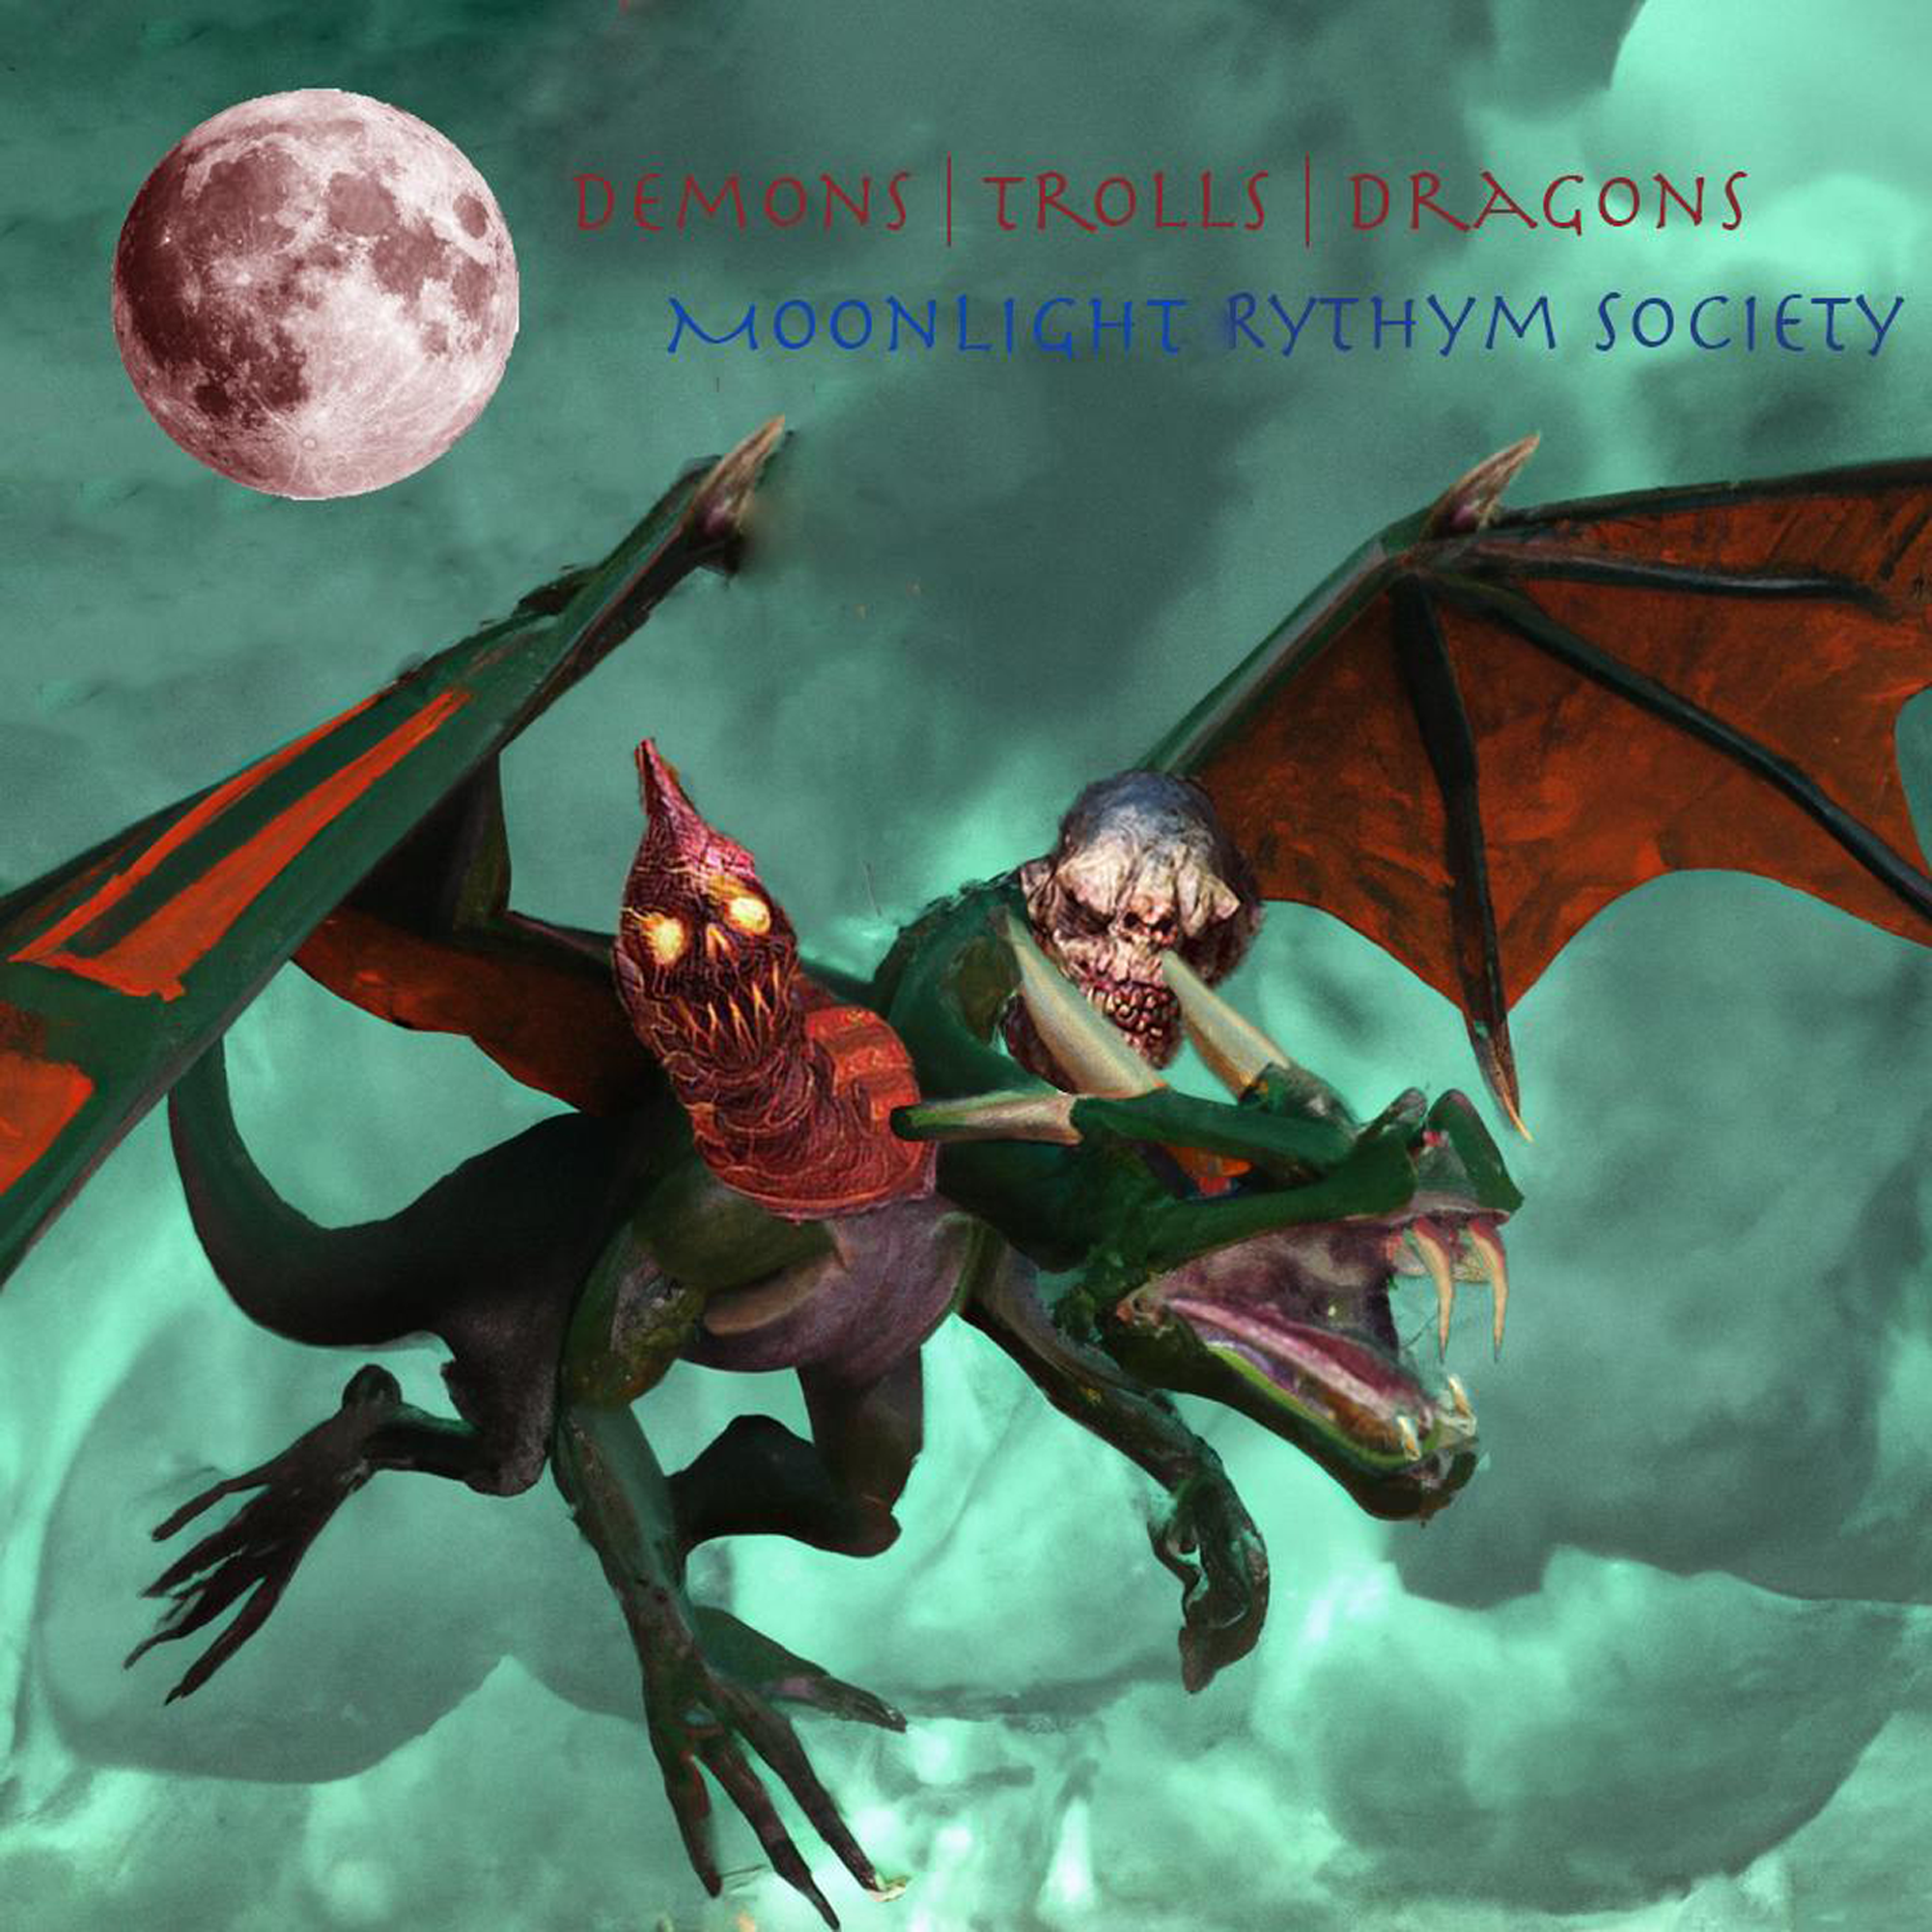 After receiving critical acclaim and stellar reviews, Moonlight Rhythm Society (MRS) drop a fresh new accomplished sound with ‘Demons, Trolls and Dragons’.